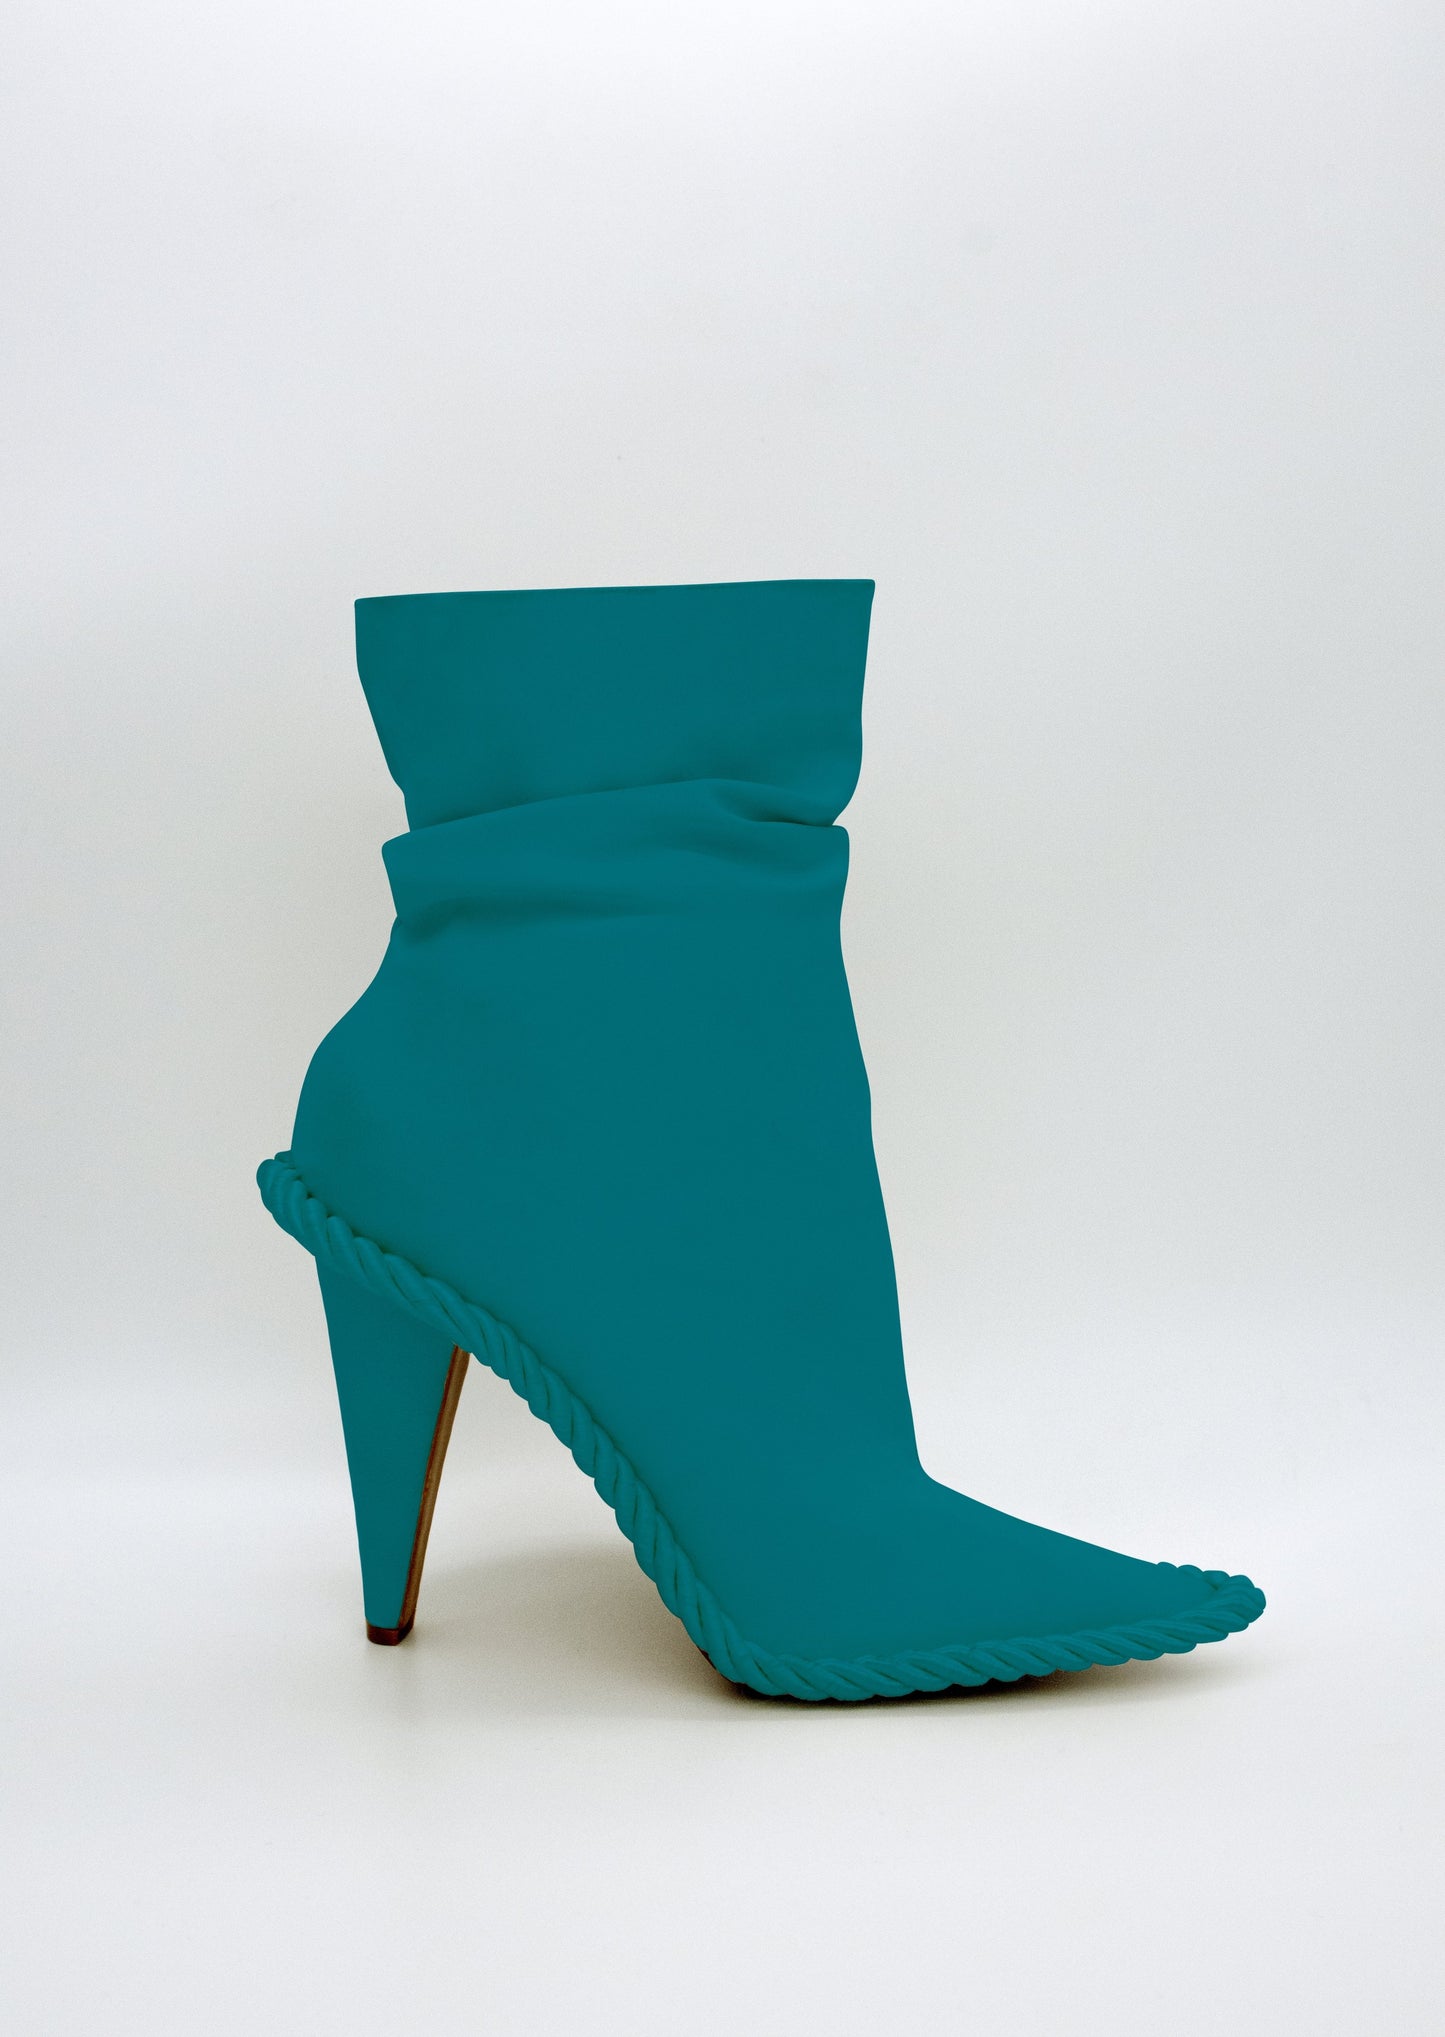 Victor dE Souza Retoricale Cable Boot in Teal